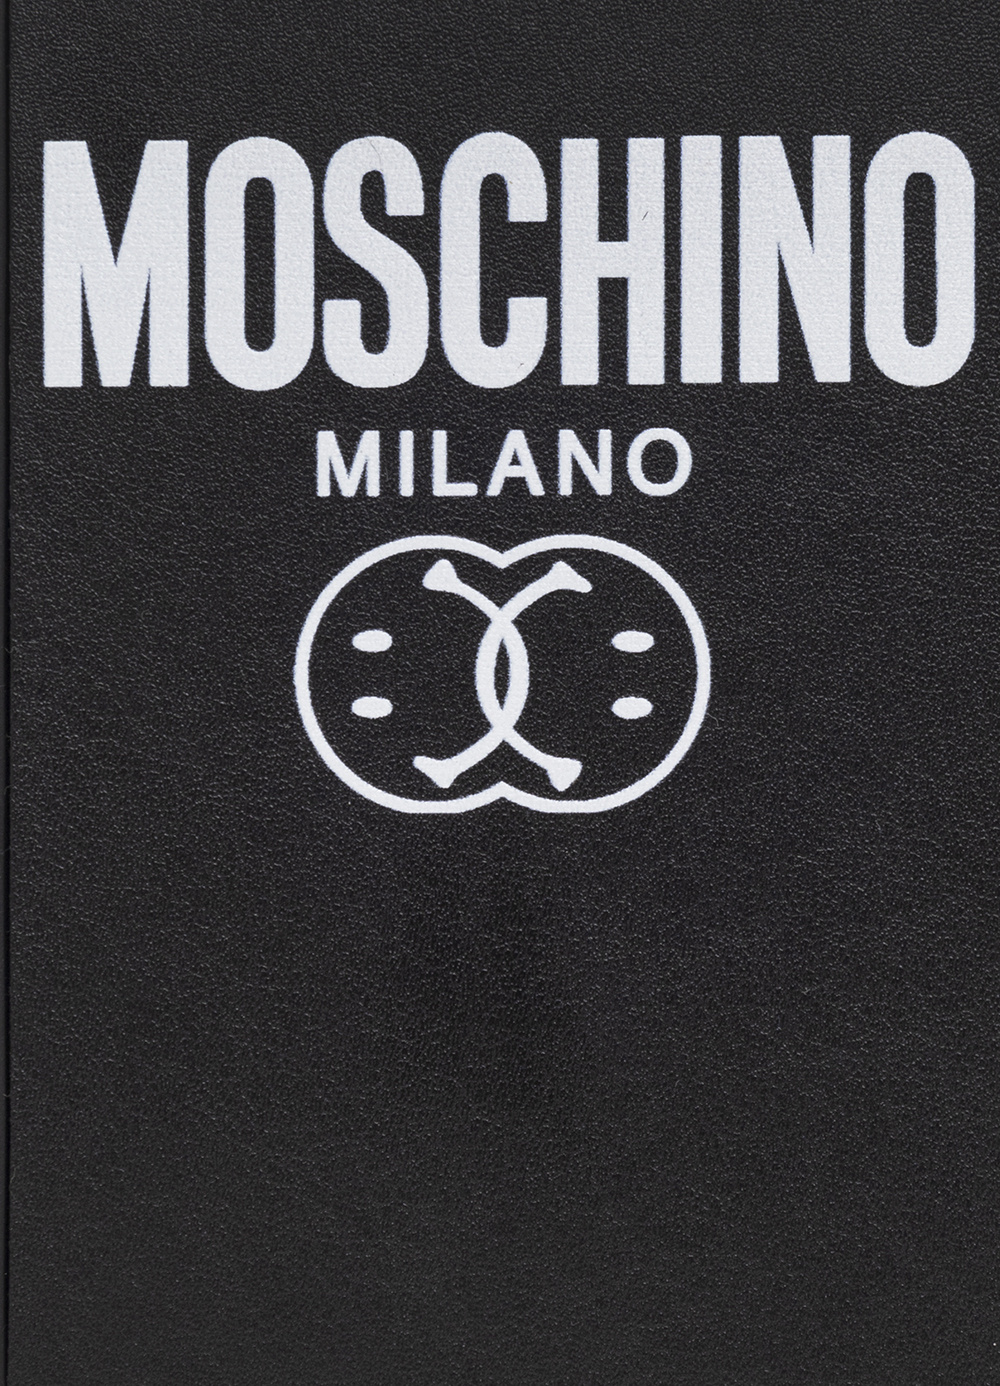 Moschino Jump into the world of kidcore®